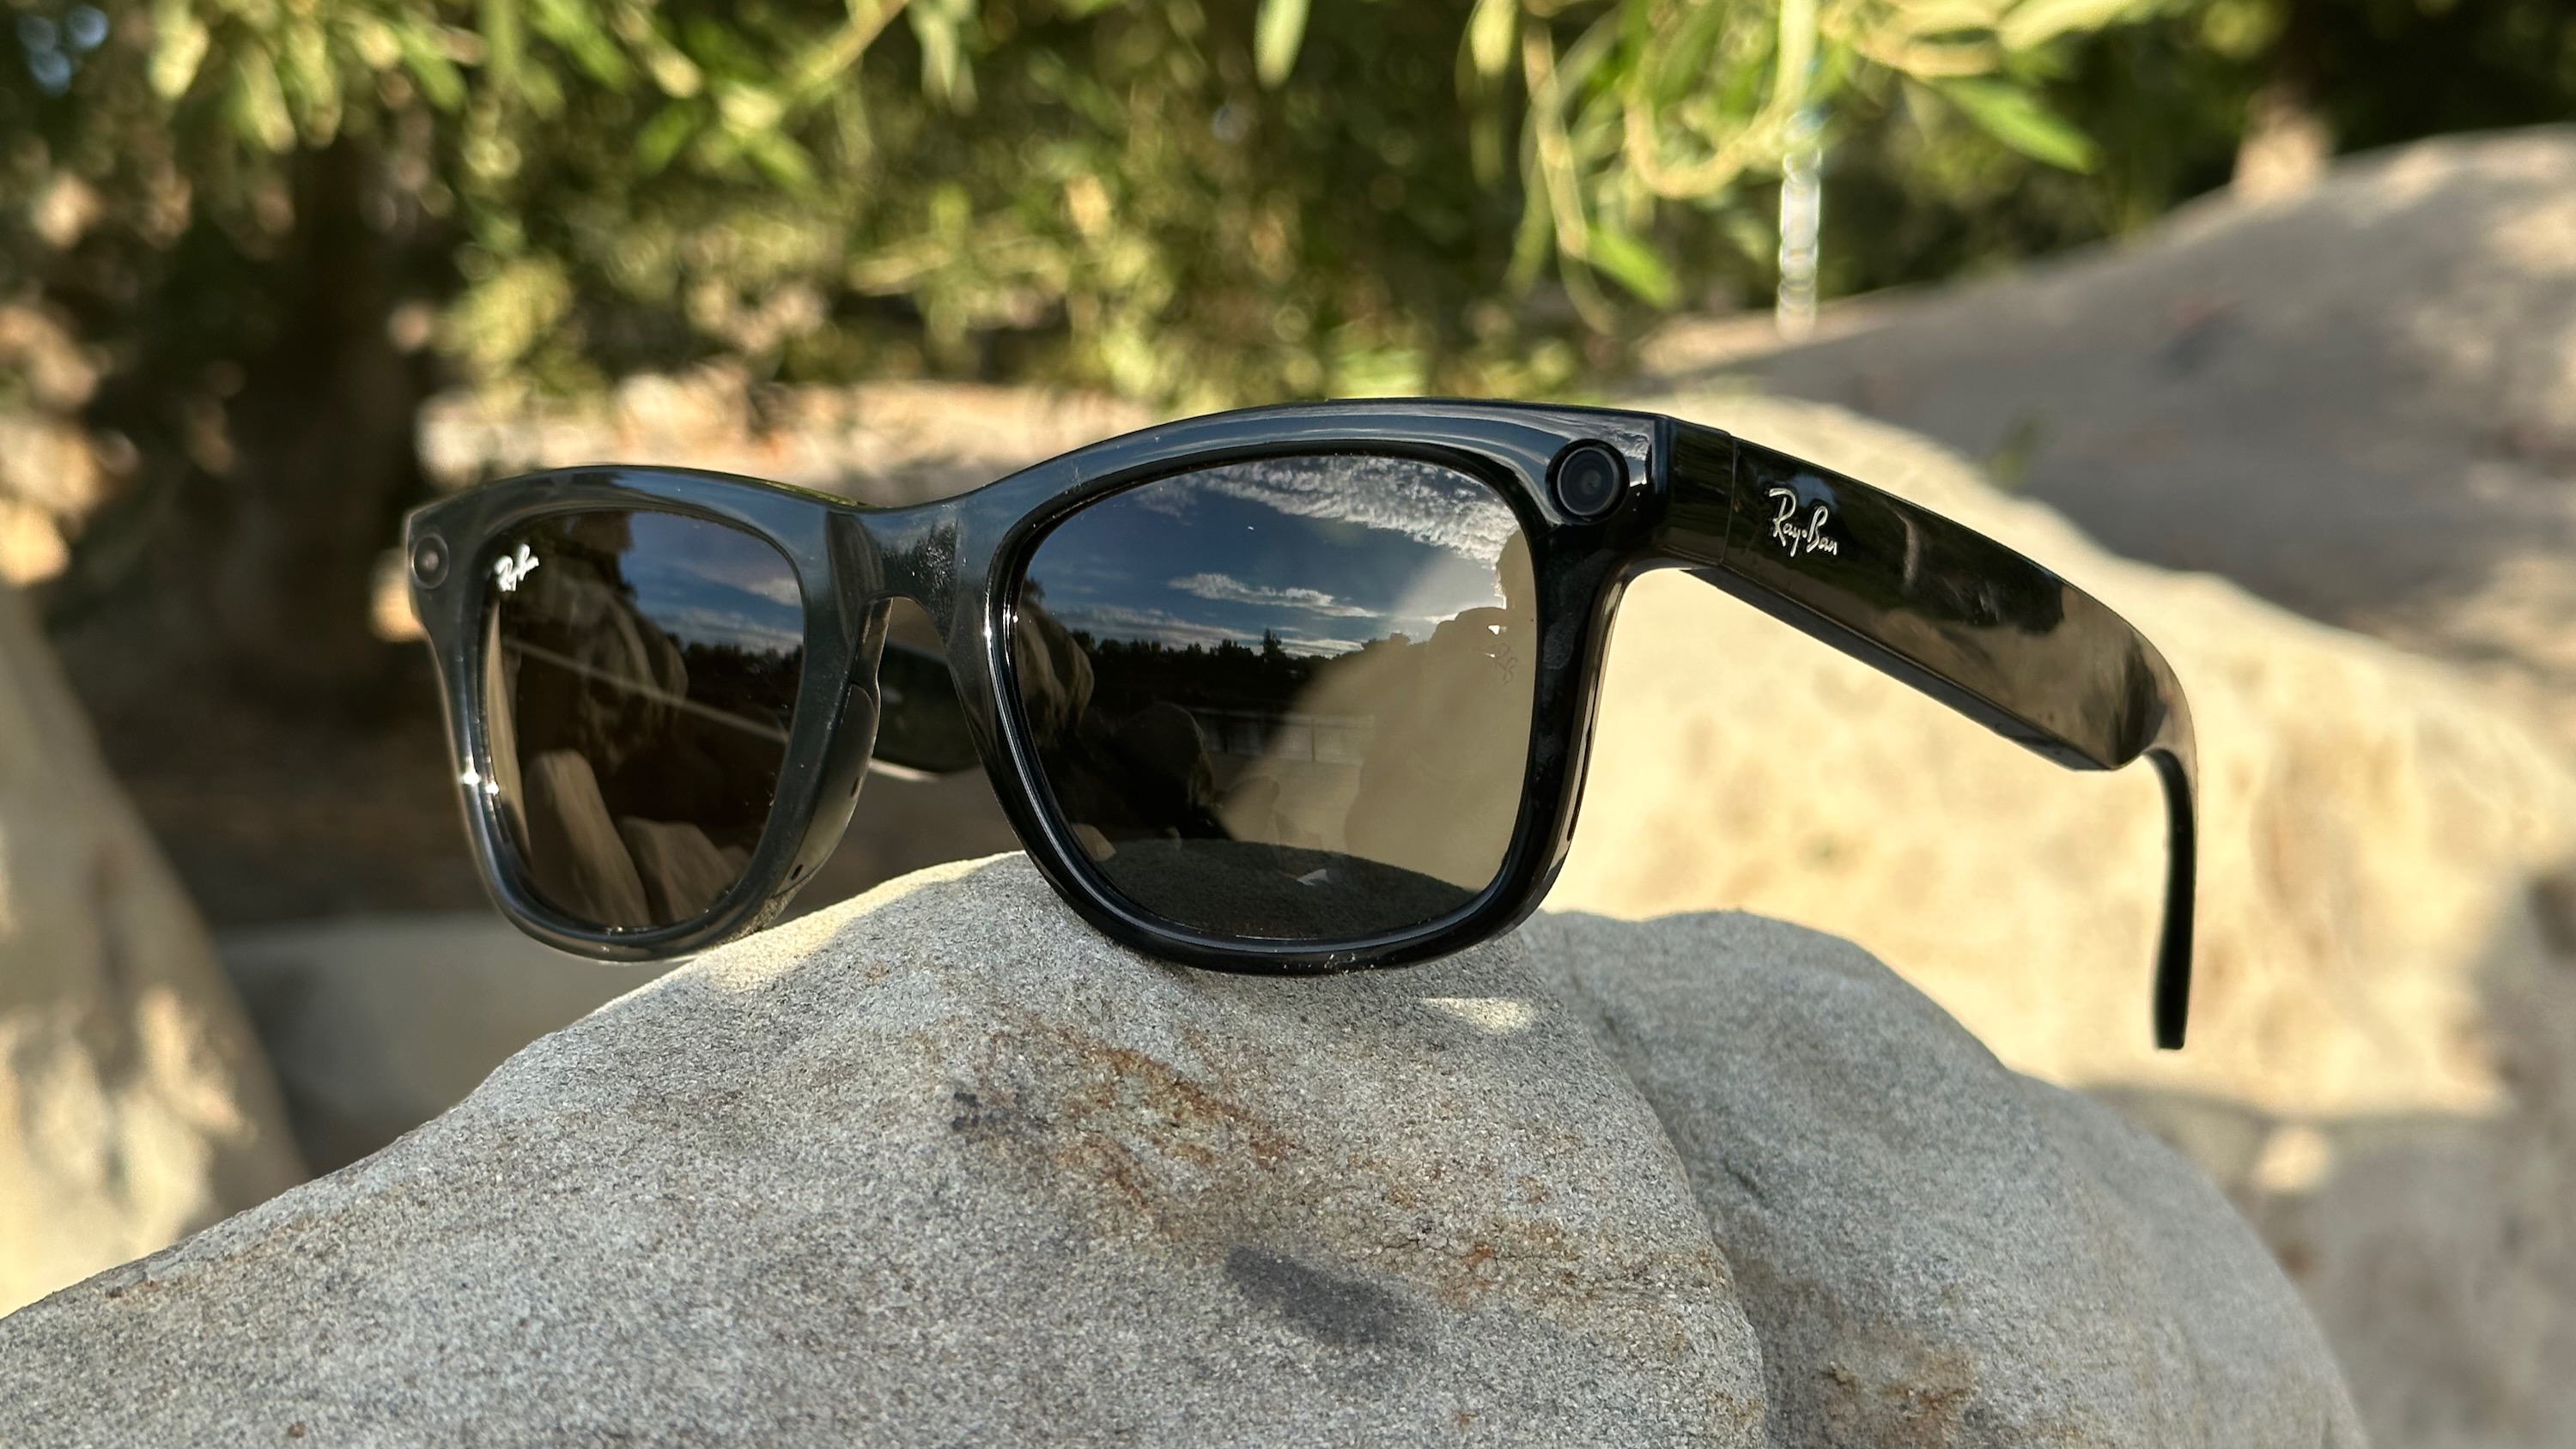 A side view of the Ray-Ban Meta smart glasses